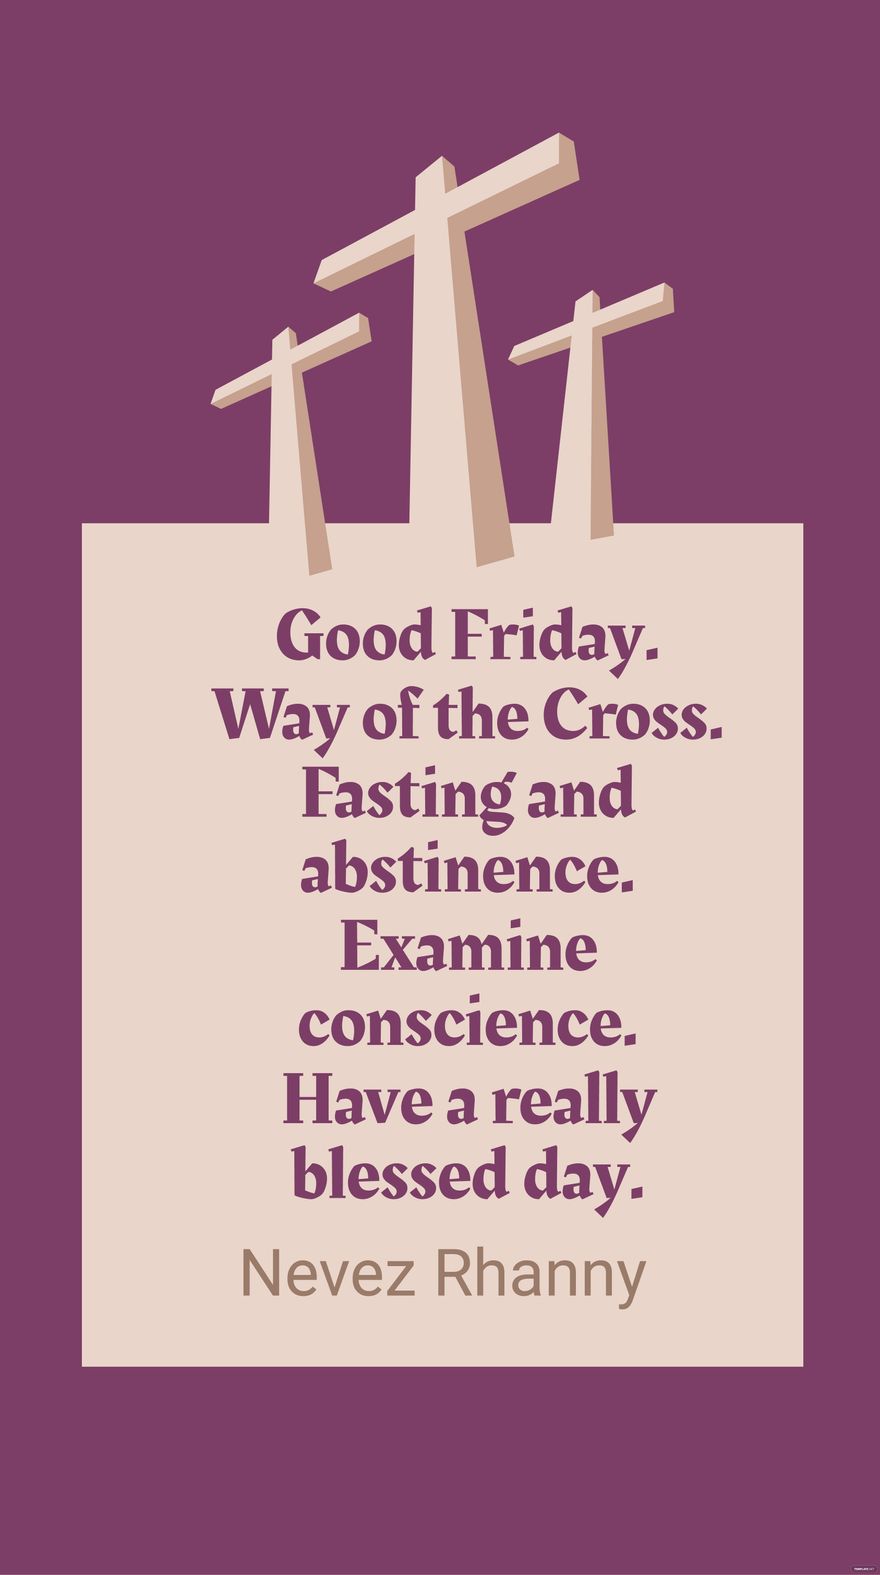 Good Friday Quotes - Images | Template.net